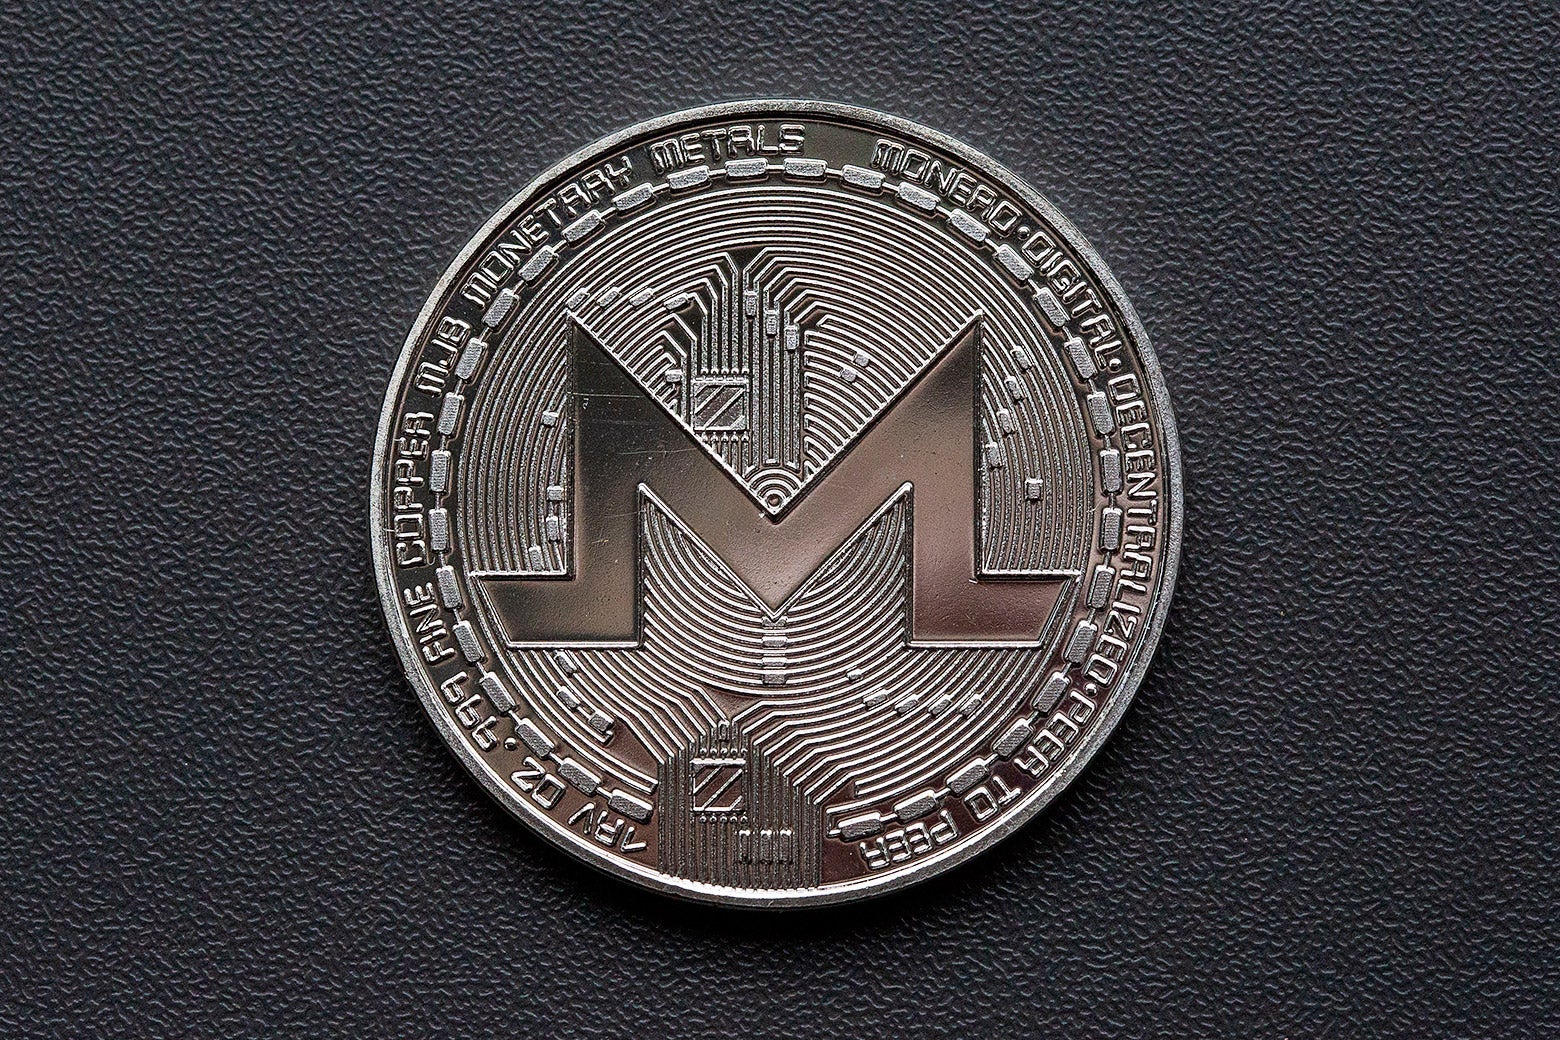 A novelty commemorative Monero coin with a large "M" in the middle.